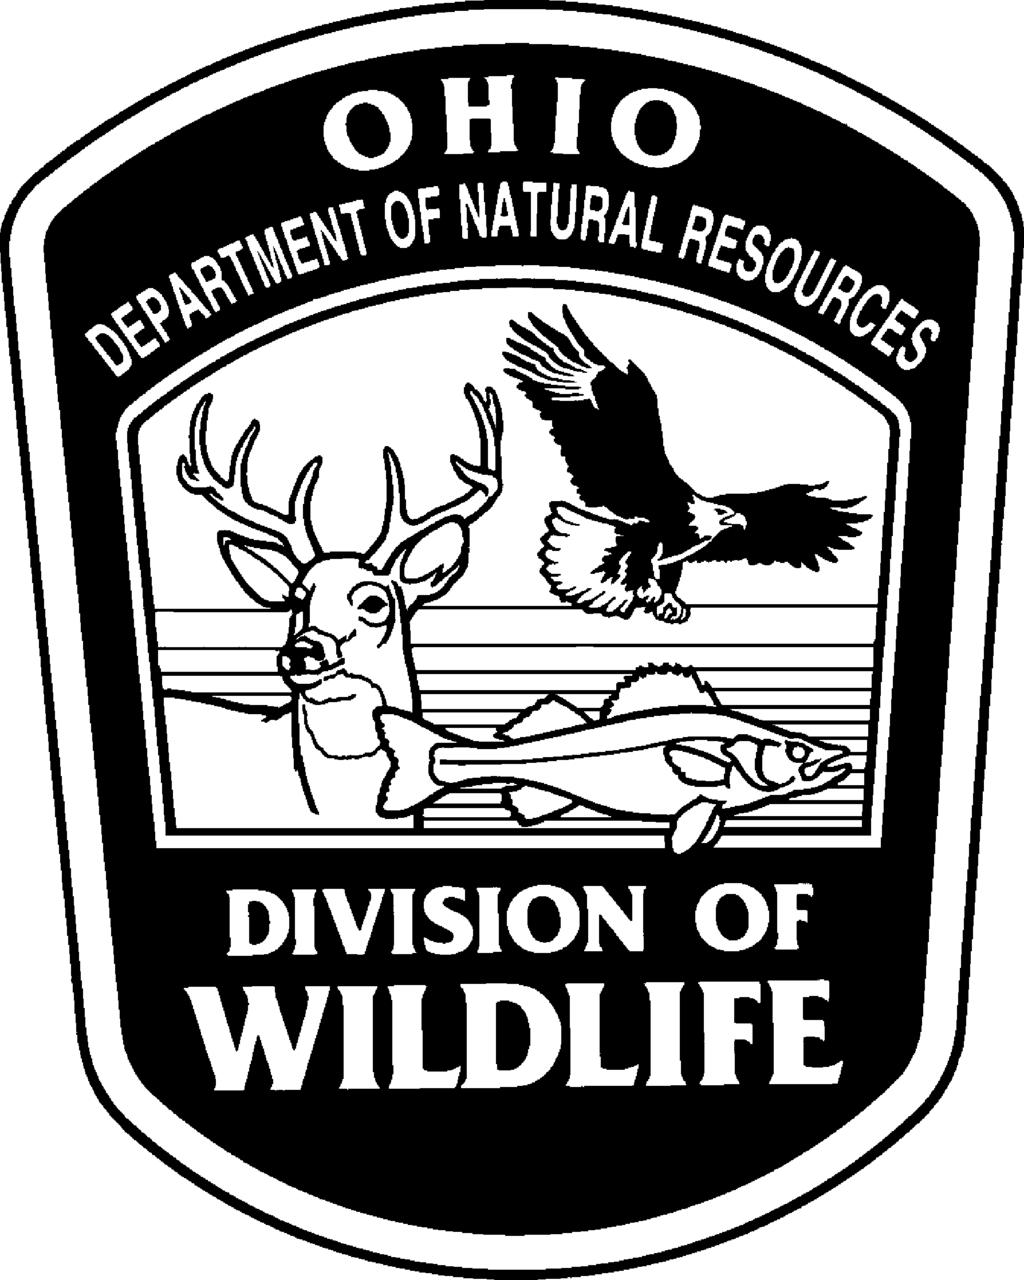 Division of Wildlife Ohio Department of Natural Resources BEAVER CREEK WILDLIFE AREA Greene County Publication 230 (102) Public Hunting & Fishing 380 Acres New Germany Trebein Road P Kemp Road Beaver